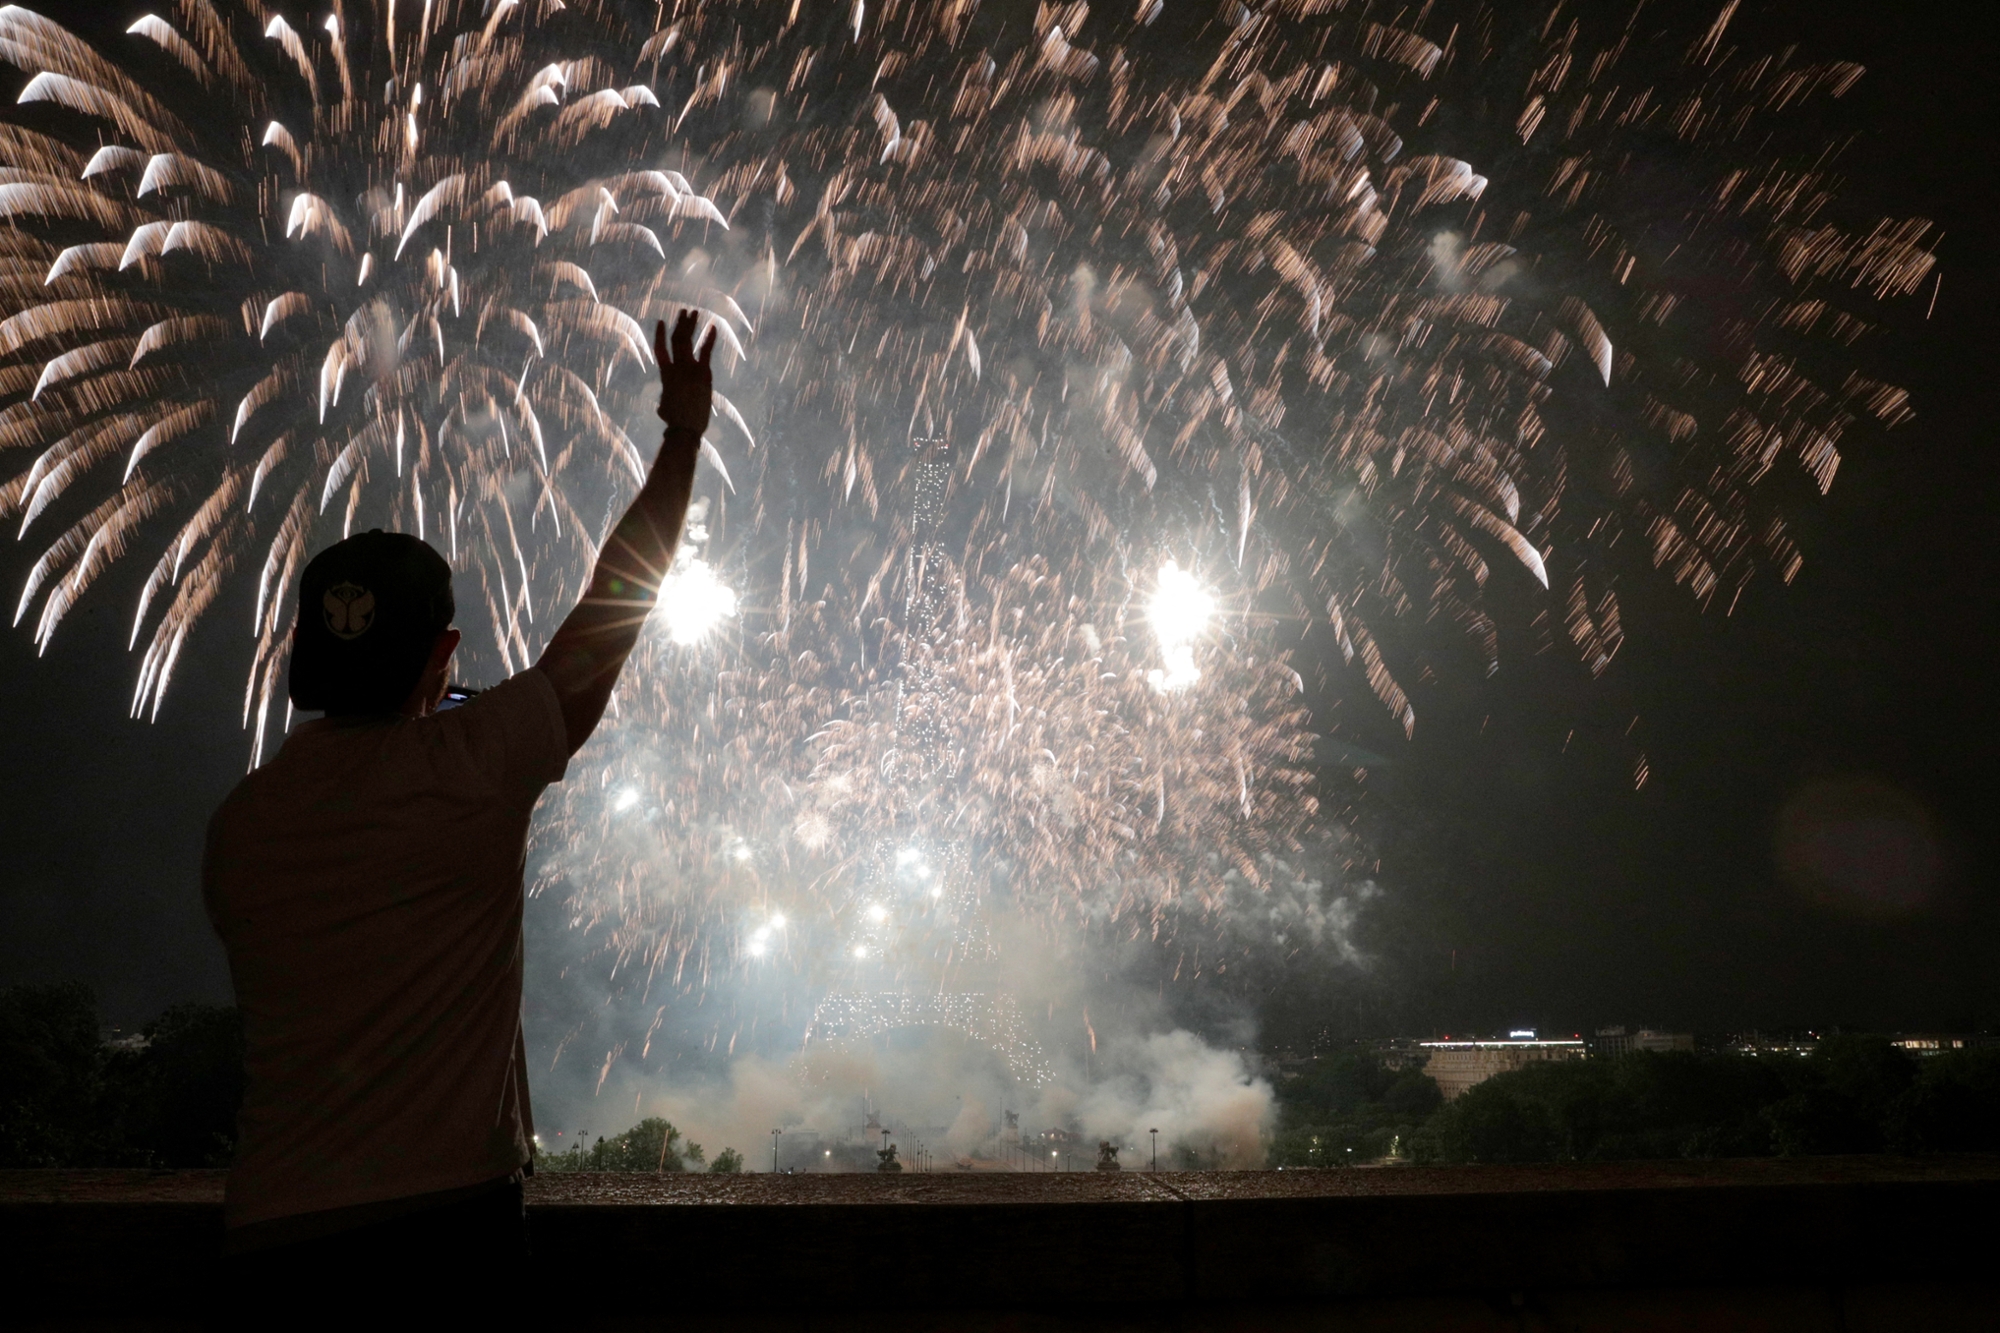 New Year's Eve fireworks: what rules to follow?